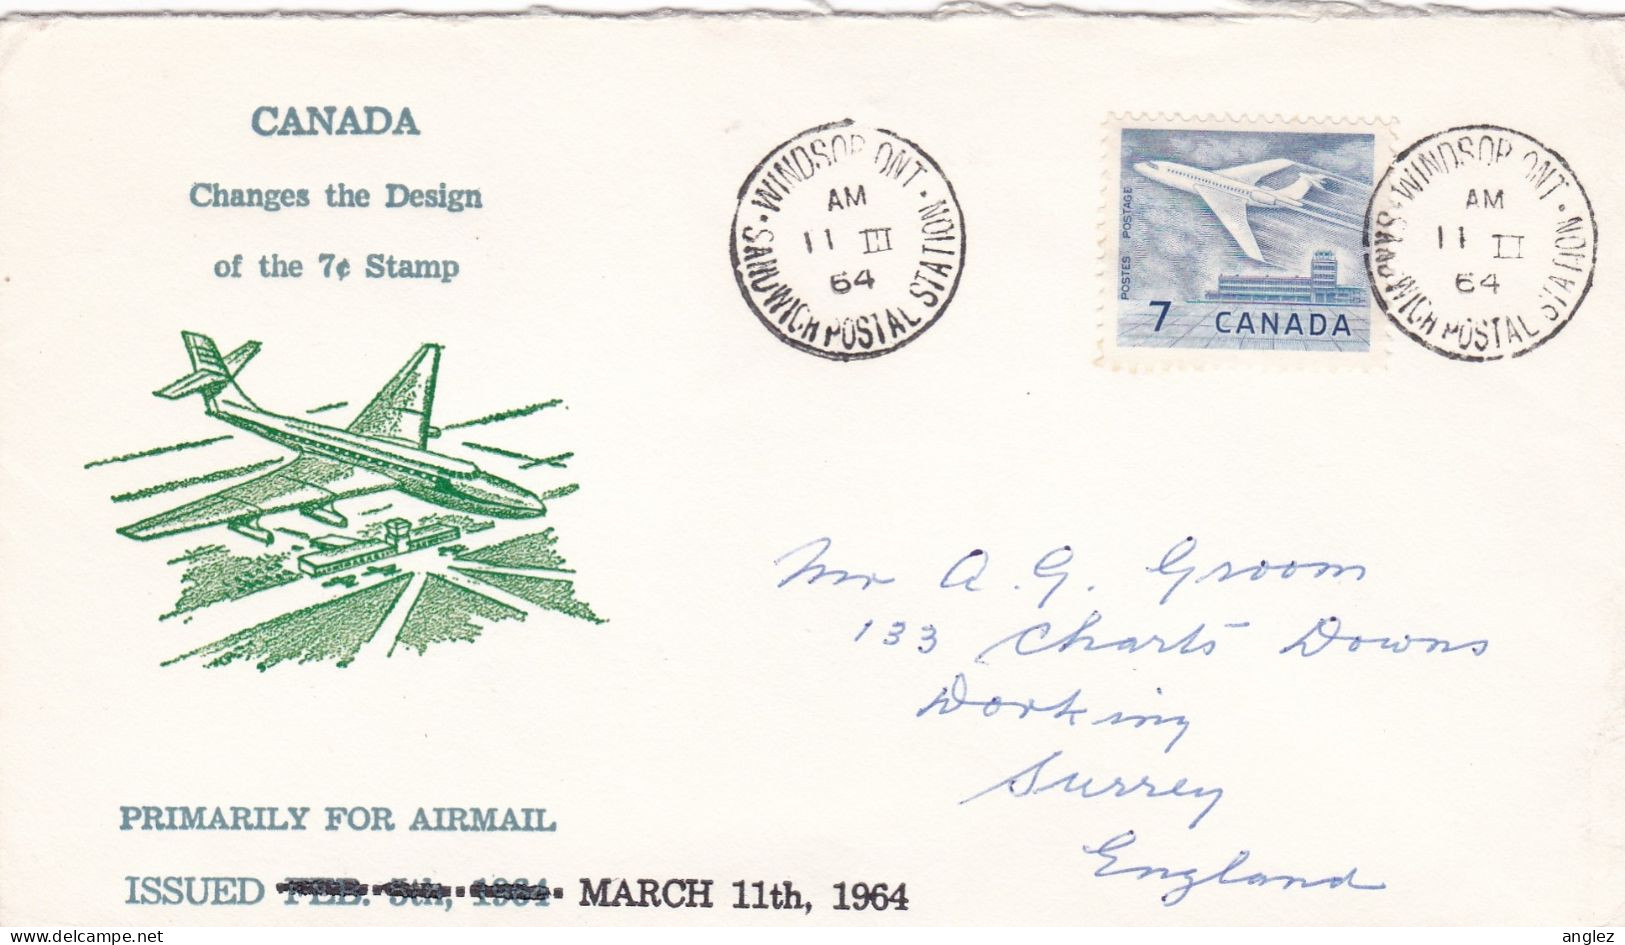 Canada - 1964 7c Airmail Stamp Changed Design Illustrated FDC - Charity Seal - Airmail